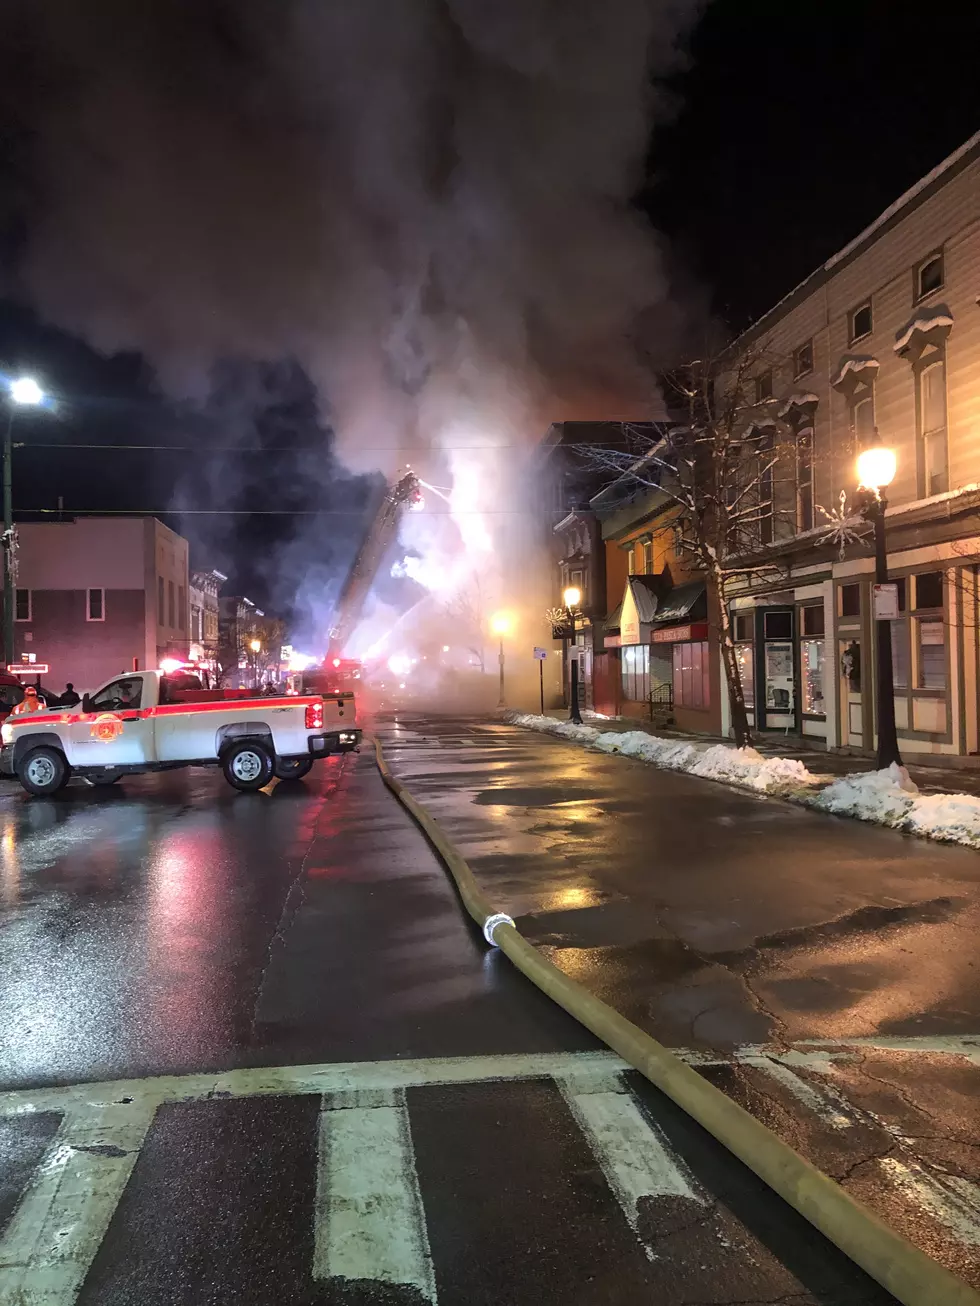 Go Fund Me Set Up to Help Victims of Boonville Fire Rebuild